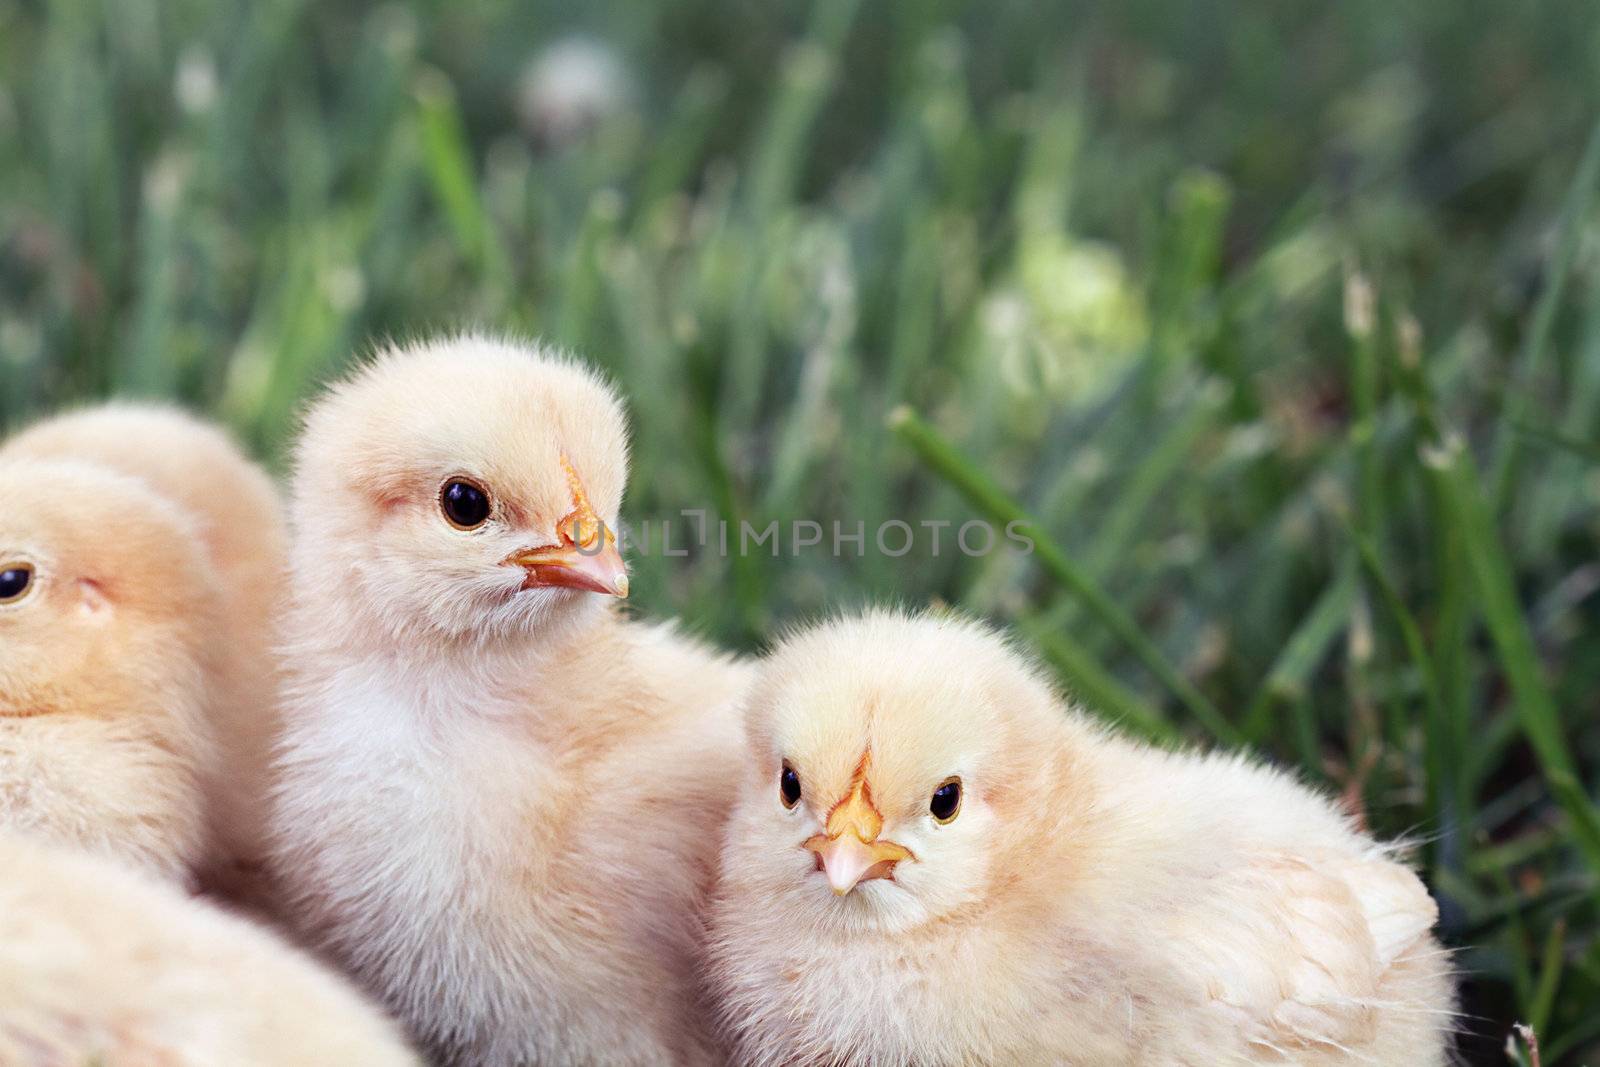 Little Chicks by StephanieFrey